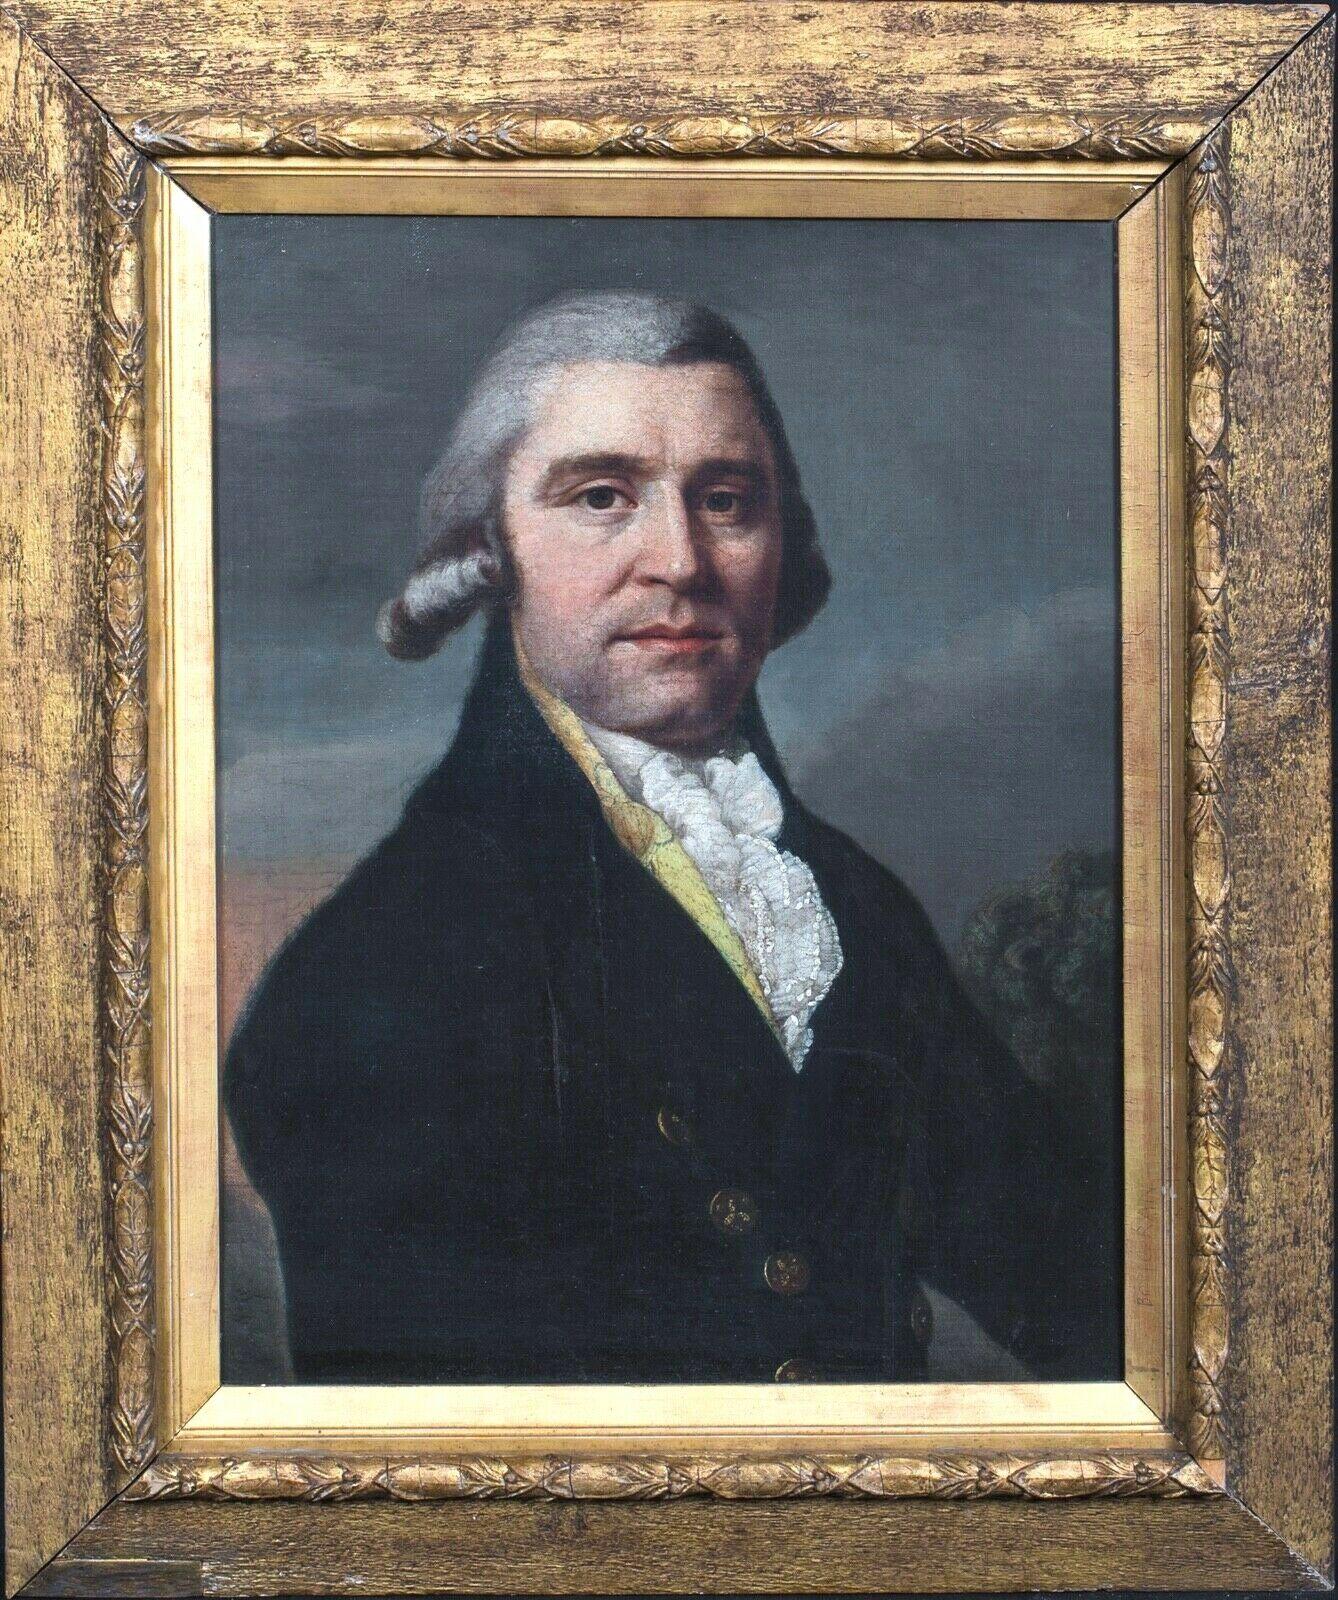 Unknown Portrait Painting - Portrait Of Gentleman, reputed to by Samuel Adams (1722-1803), 18th Century 